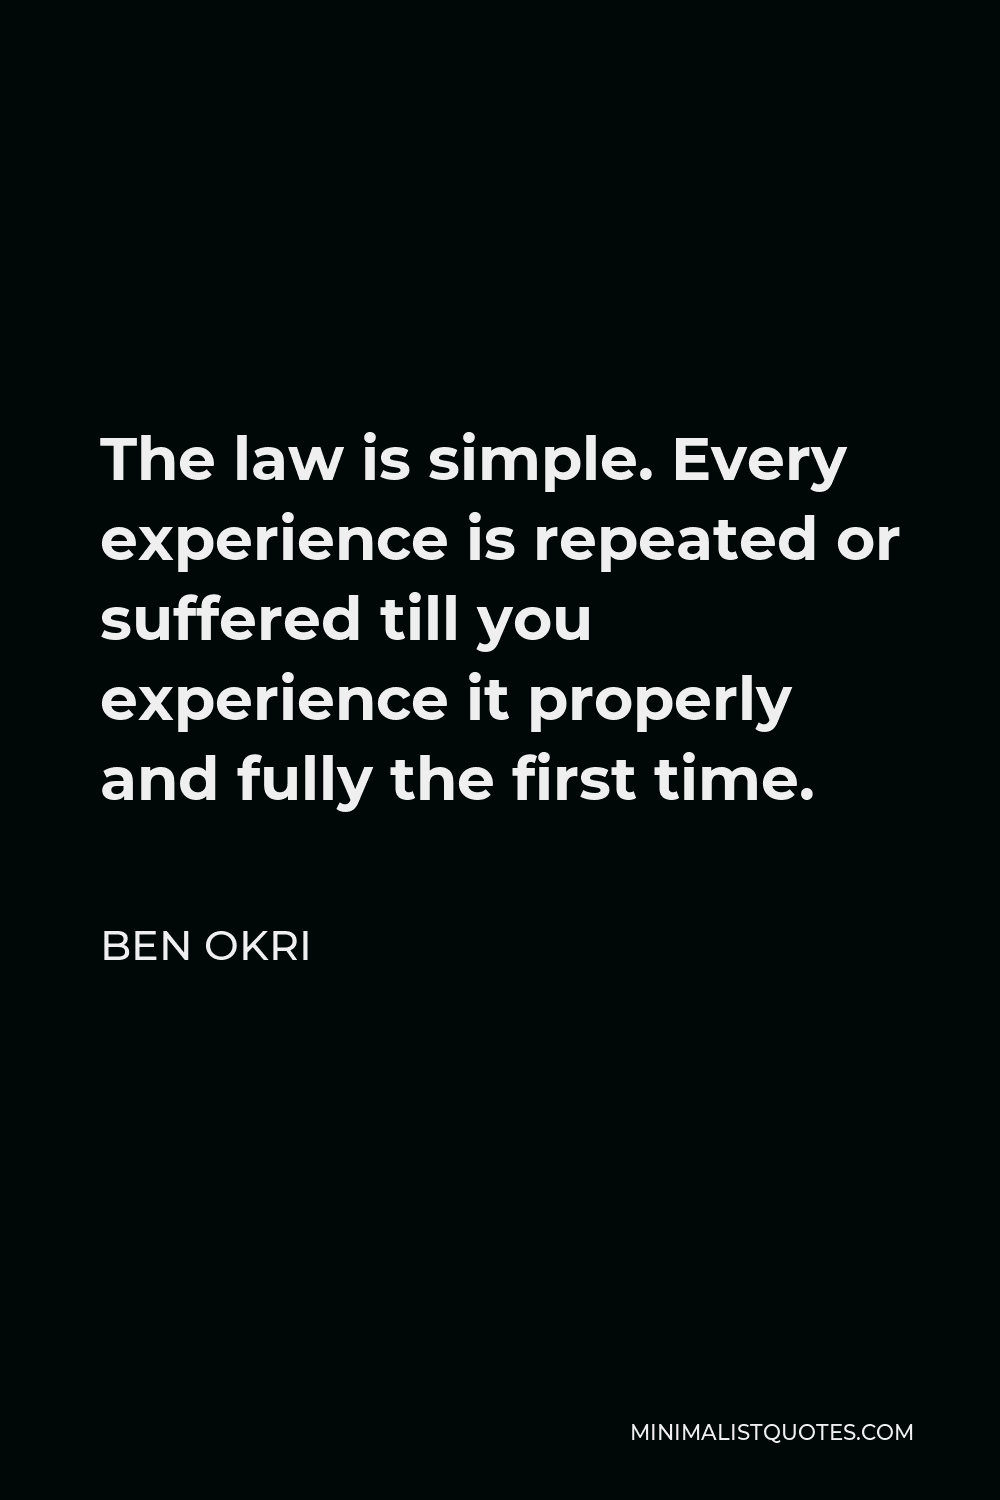 Ben Okri Quote - The law is simple. Every experience is repeated or suffered till you experience it properly and fully the first time.